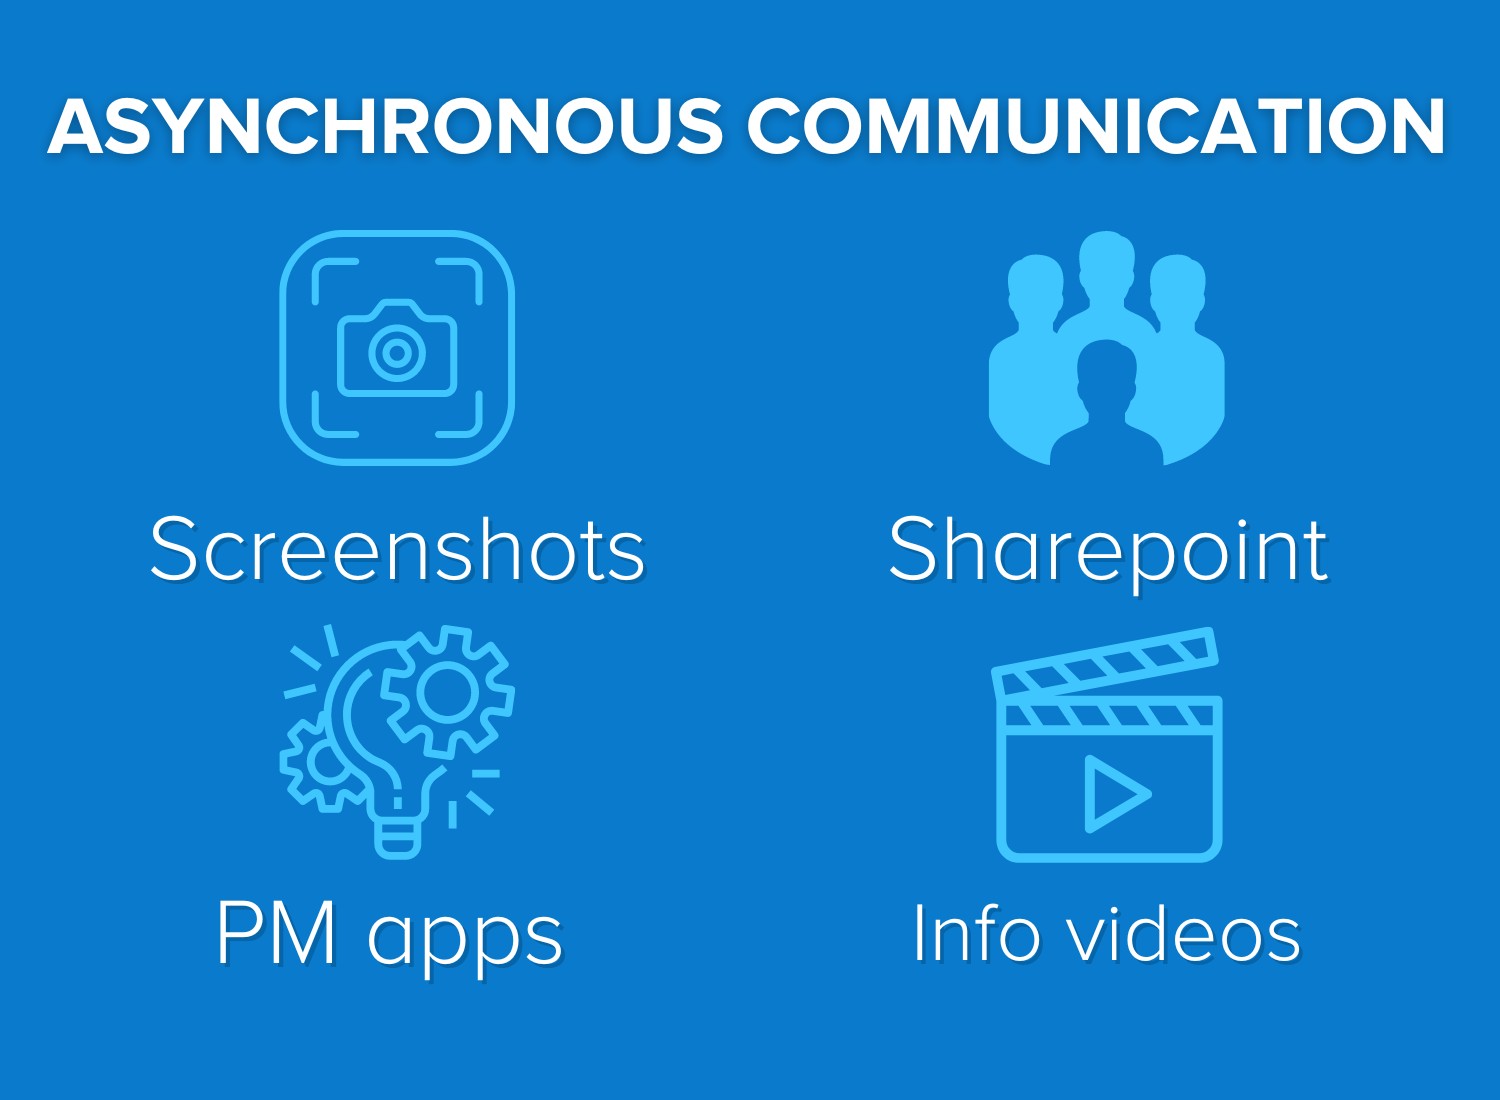 Different types of async communication: screenshots, Sharepoint, PM apps, and info videos.